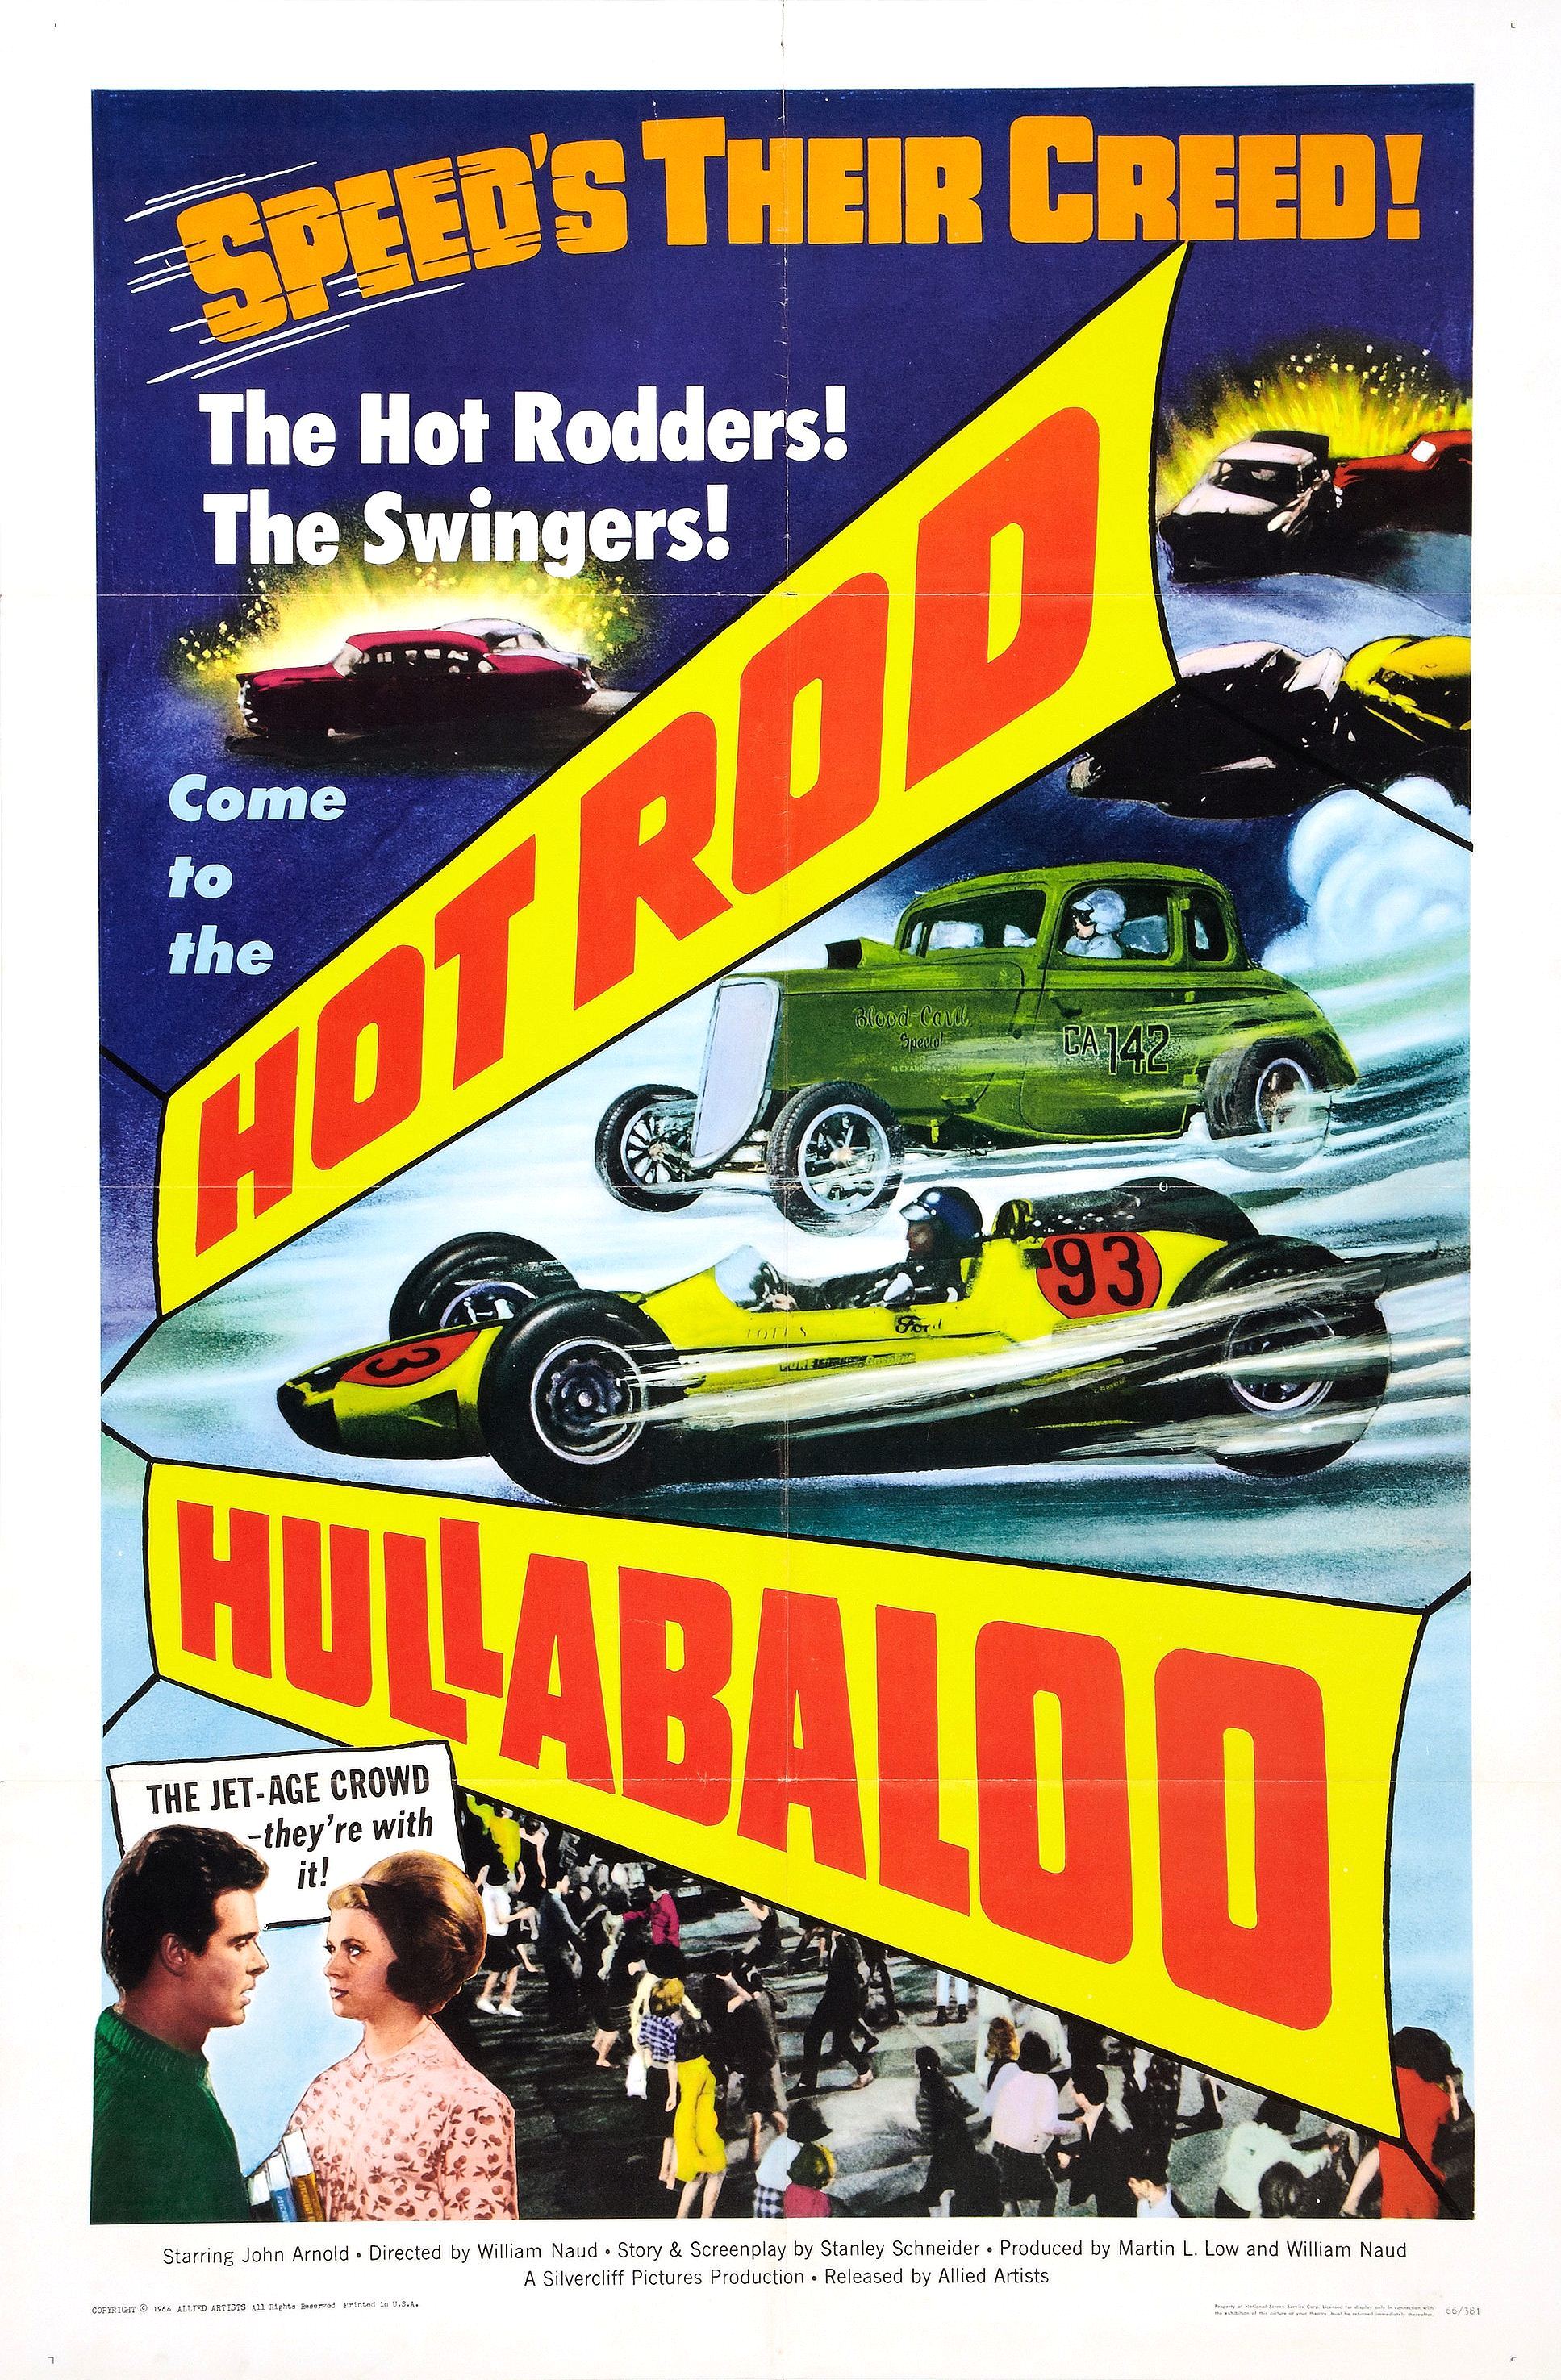 poster - Ceed'S Their Creed! The Hot Rodders! The Swingers! Come to the Hullabaloo Te Jet Age Crond they're with